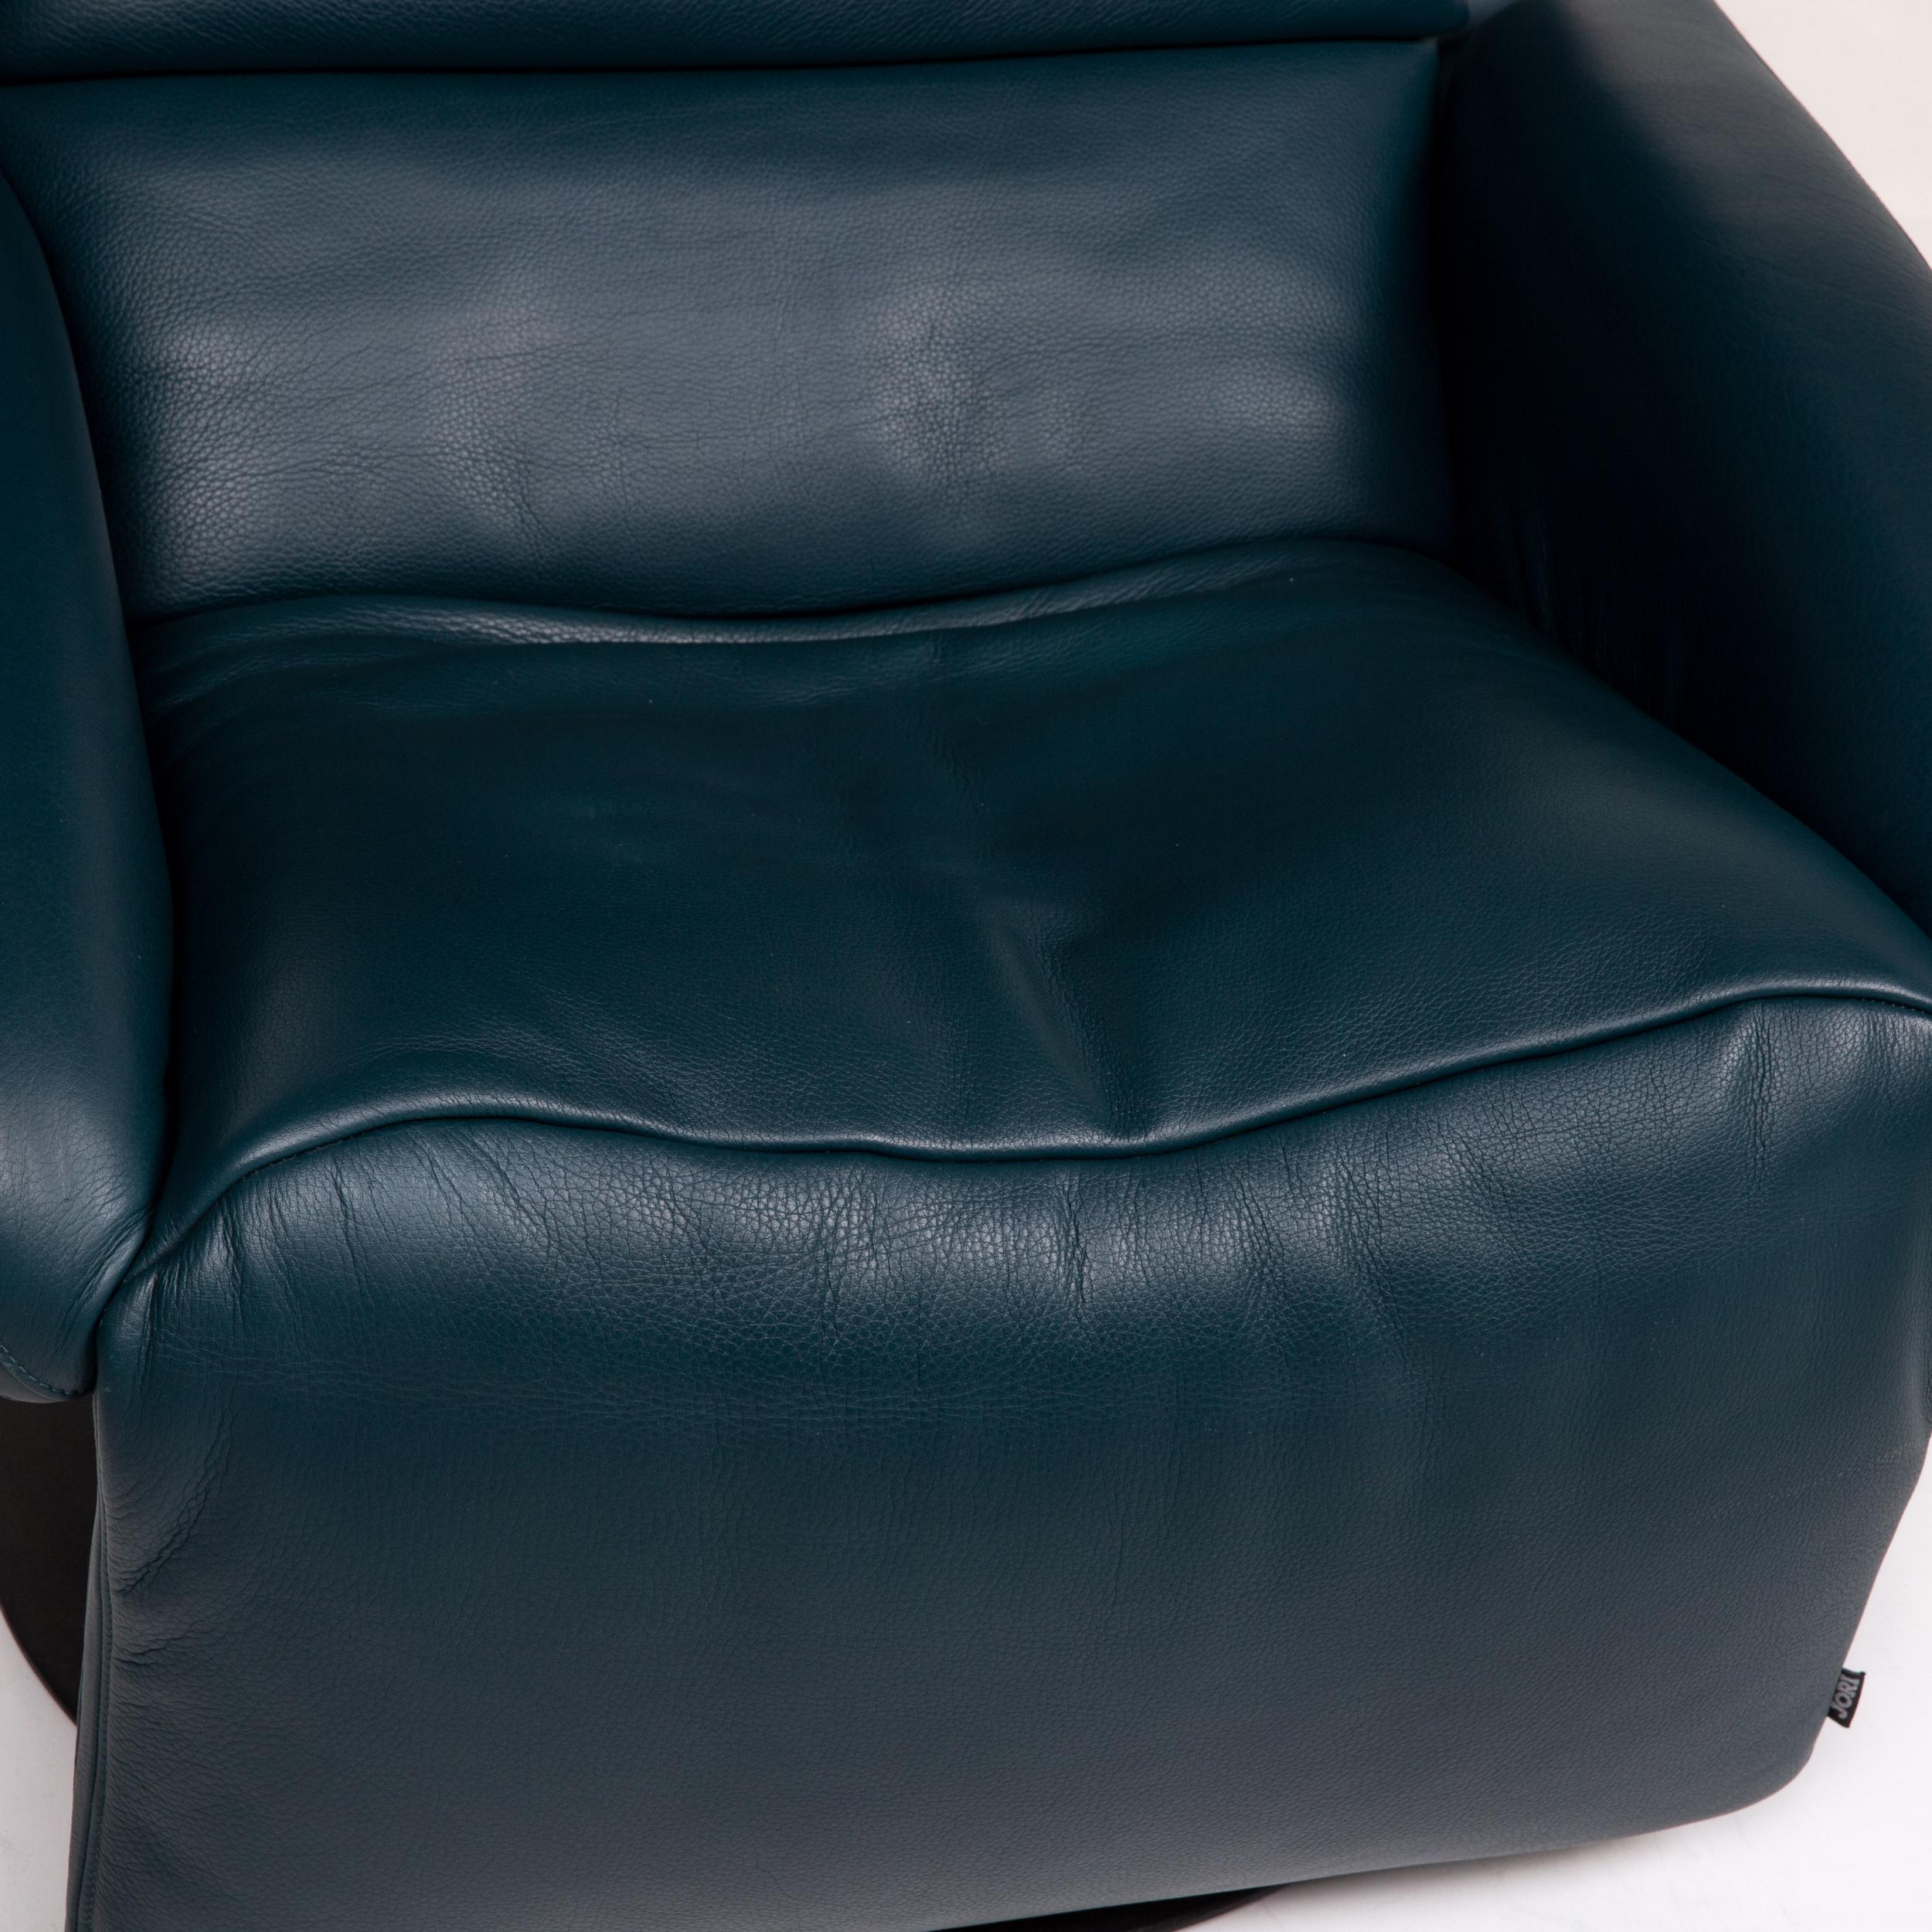 Belgian JORI Leather Armchair Petrol Blue Green Relax Chair Function Relax Function For Sale